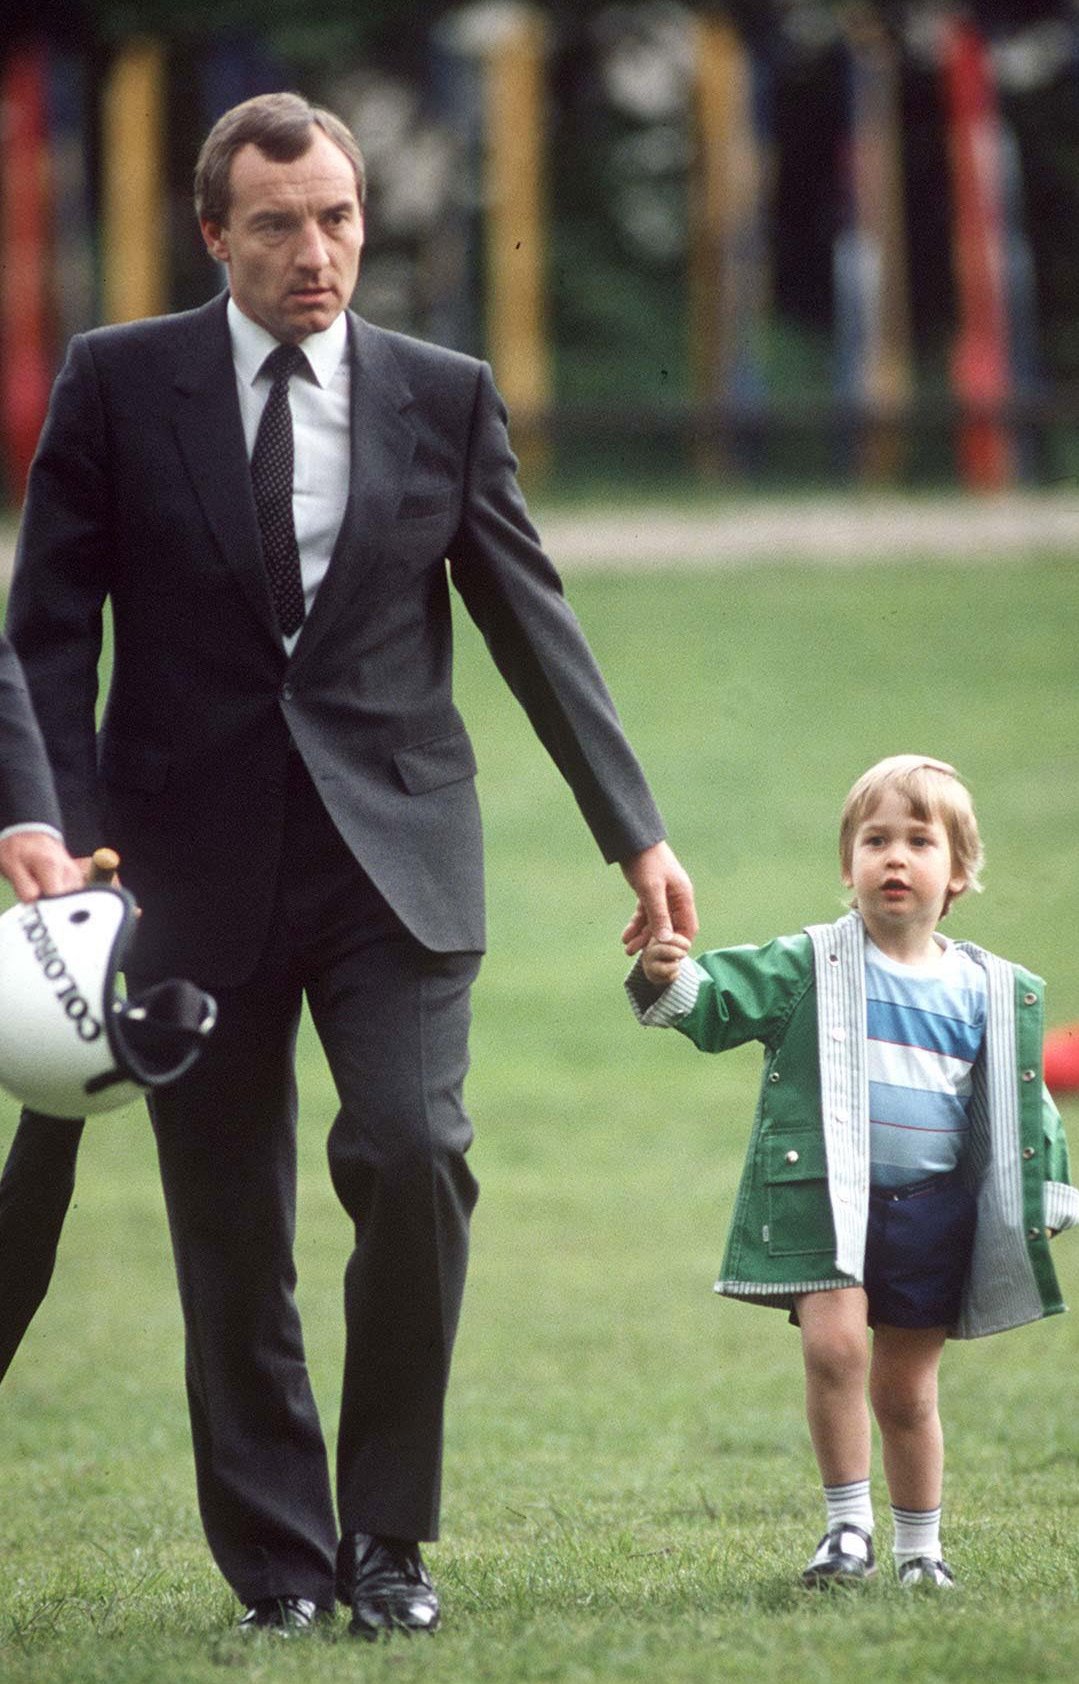  Prince William at almost 3 years old with his police bodyguard Barry Mannakee. | Source: Getty Images